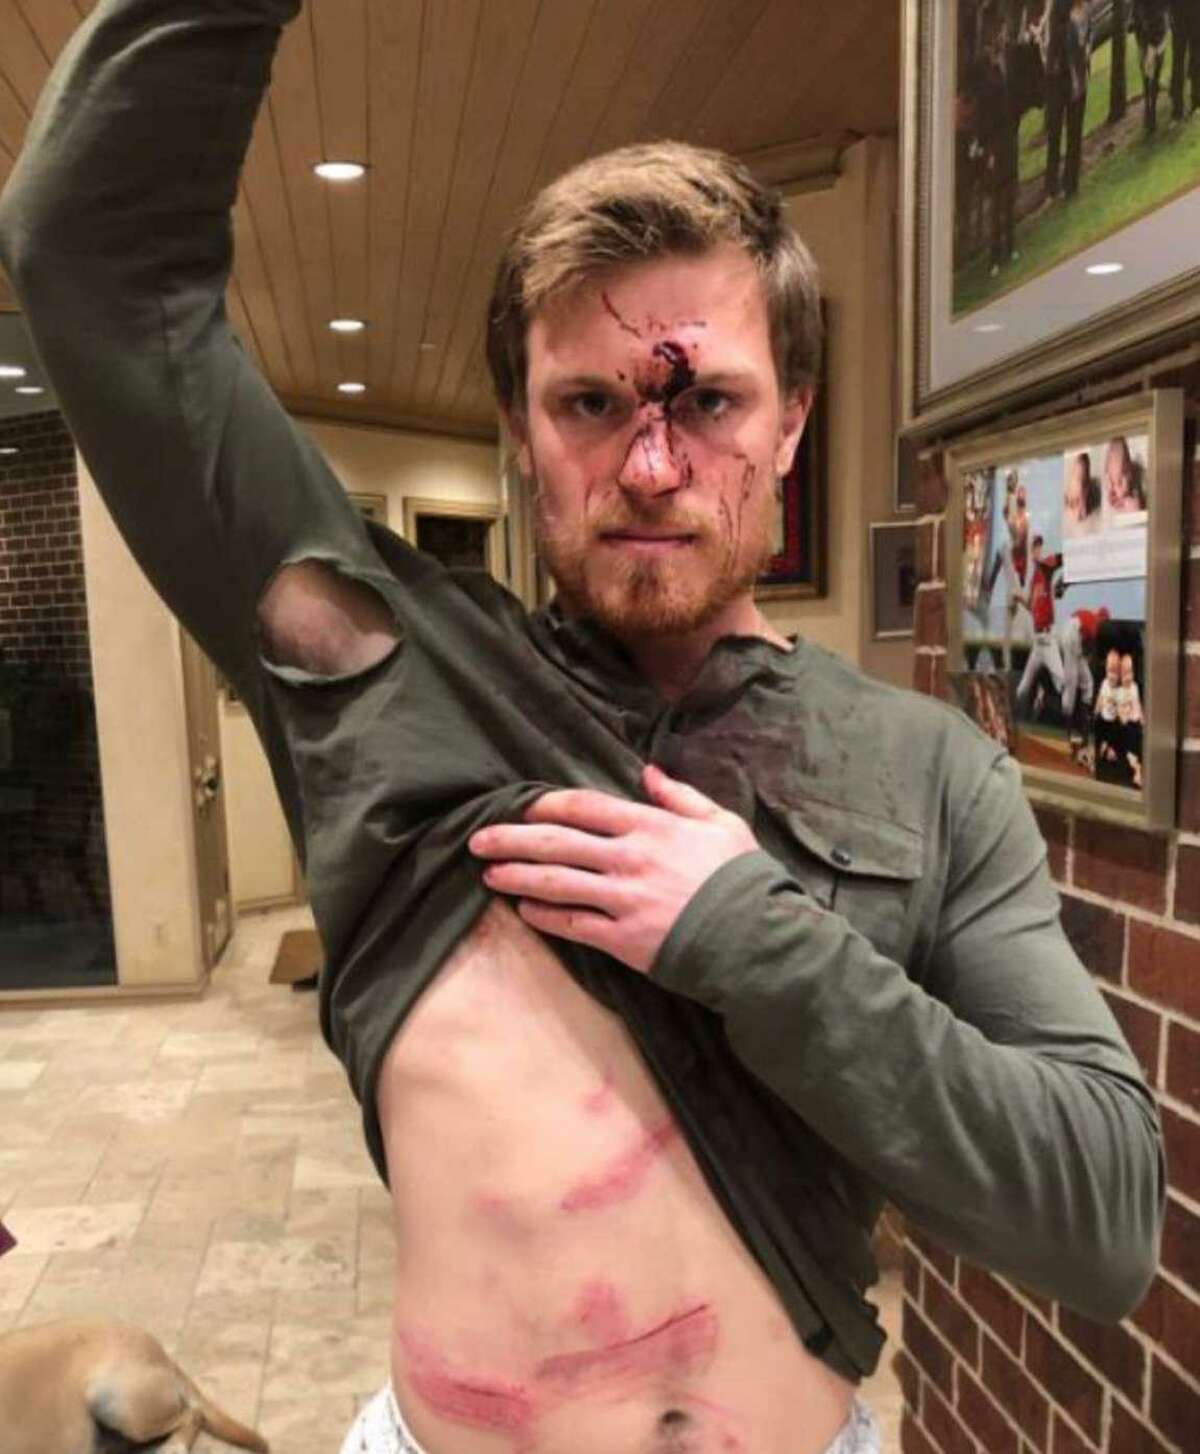 Conner Capel, 21, shows his injuries after an incident with a bouncer at Houston's Concrete Cowboy Bar. Also injured was 24-year-old Kacy Clemens, the son of former Houston Astros pitcher Roger Clemens, on Jan. 1, 2019.